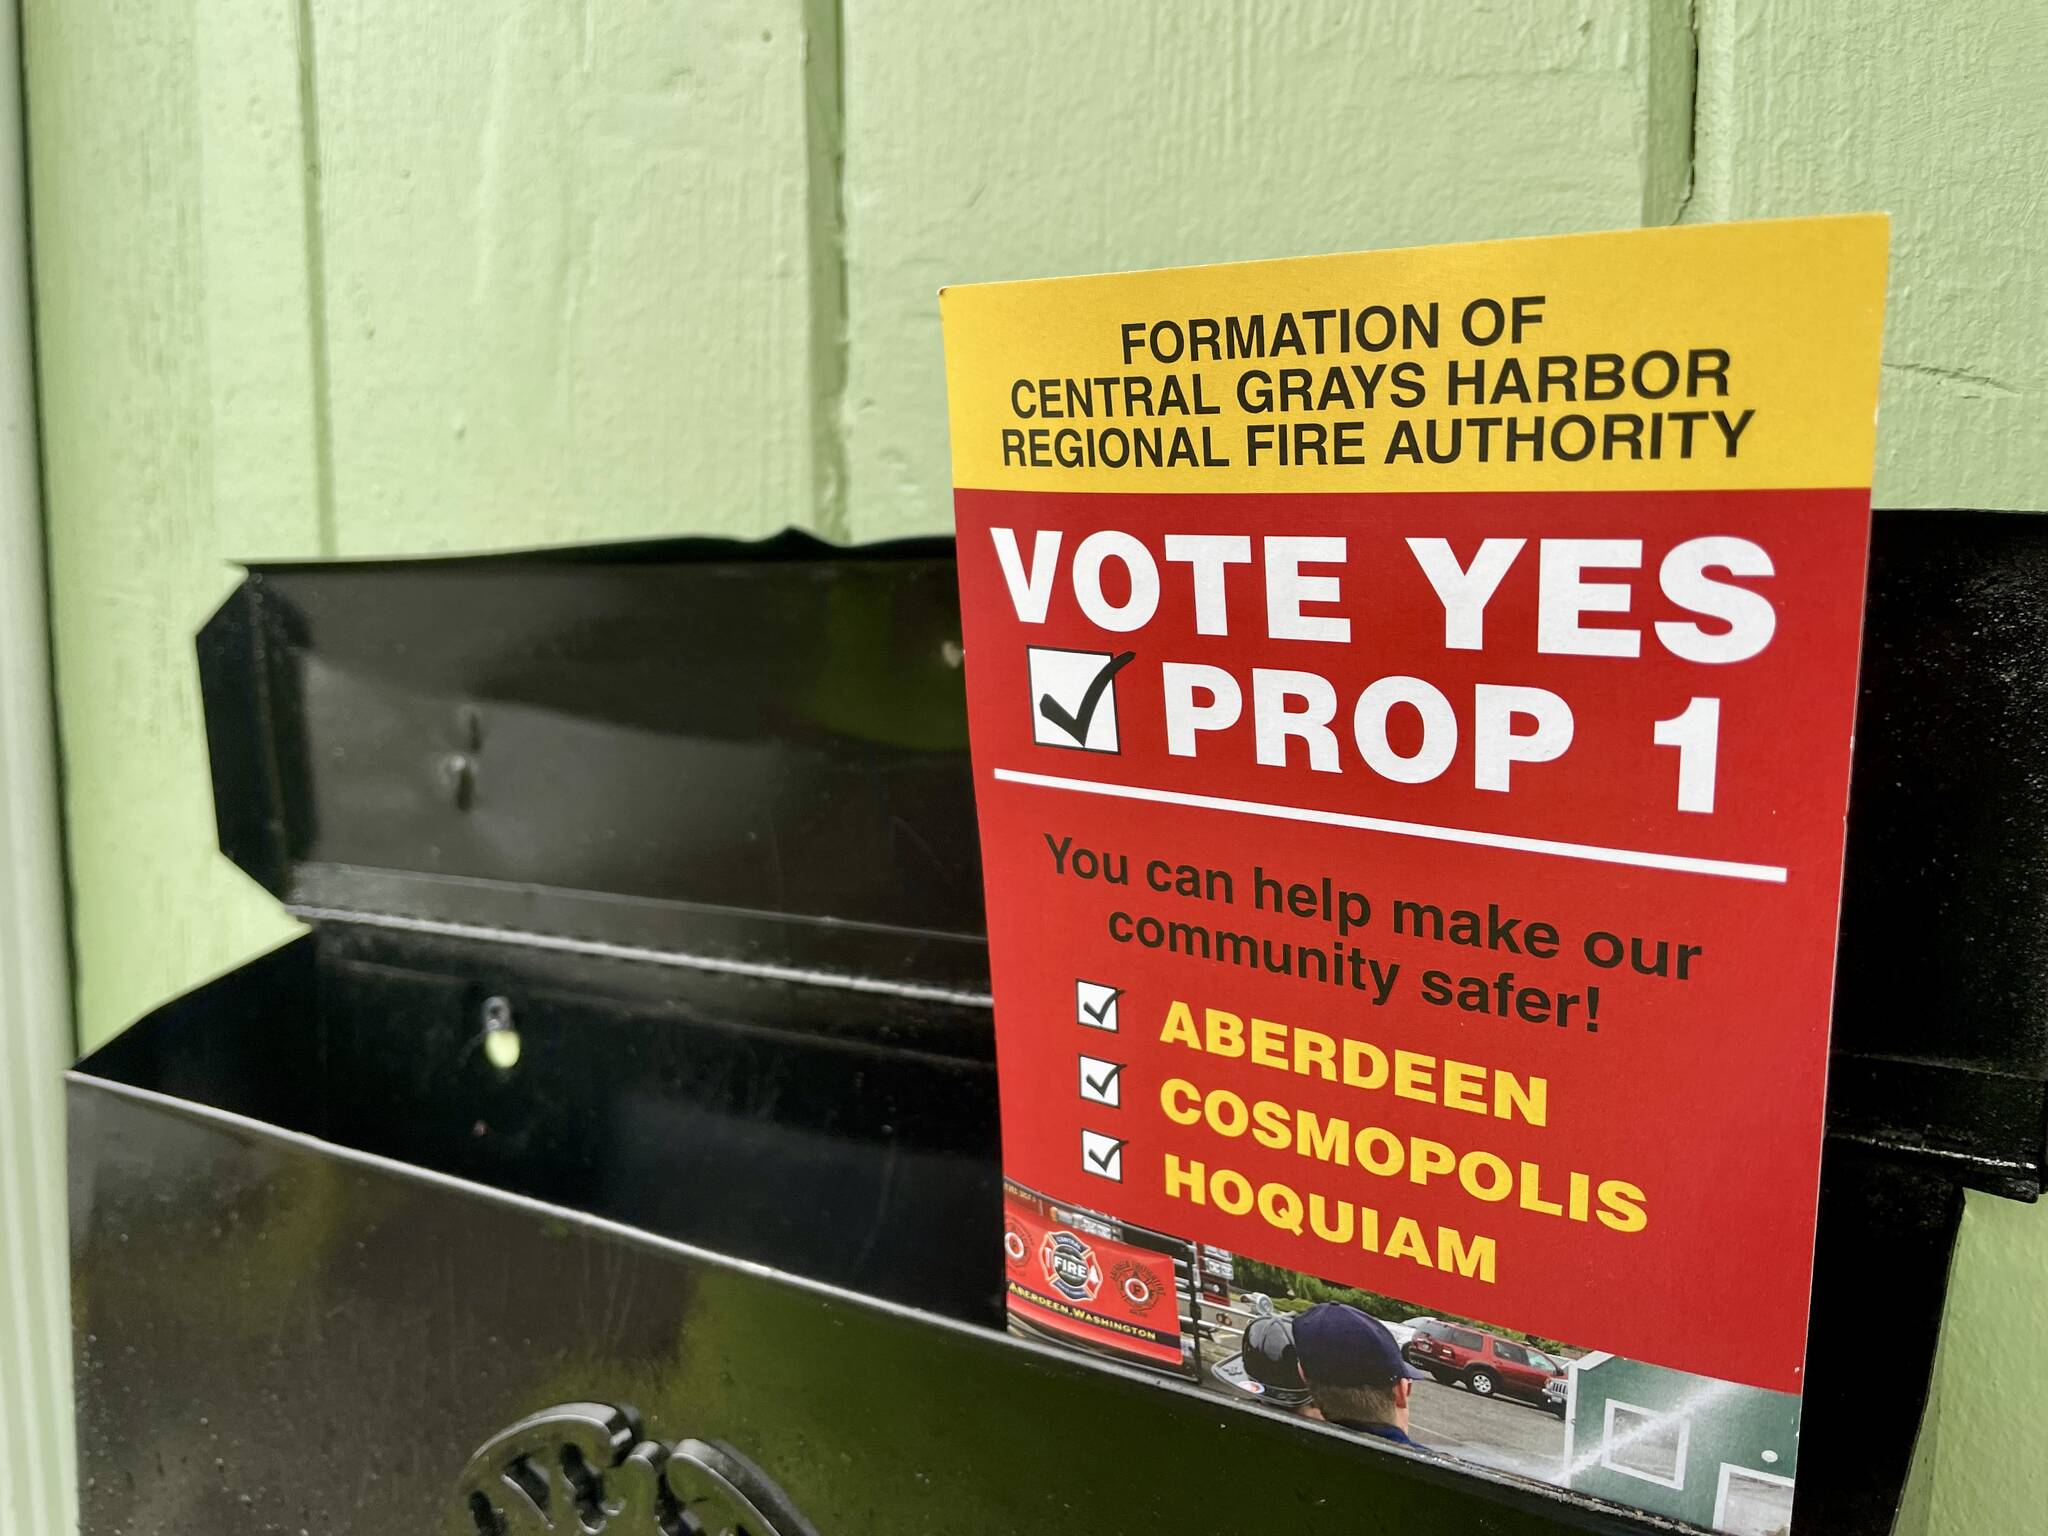 Central Grays Harbor Firefighters, the union of Aberdeen and Hoquiam firefighters, has been getting out in support of the proposed creation of a regional fire authority in the three cities of Aberdeen, Cosmopolis and Hoquiam. (Michael S. Lockett / The Daily World)